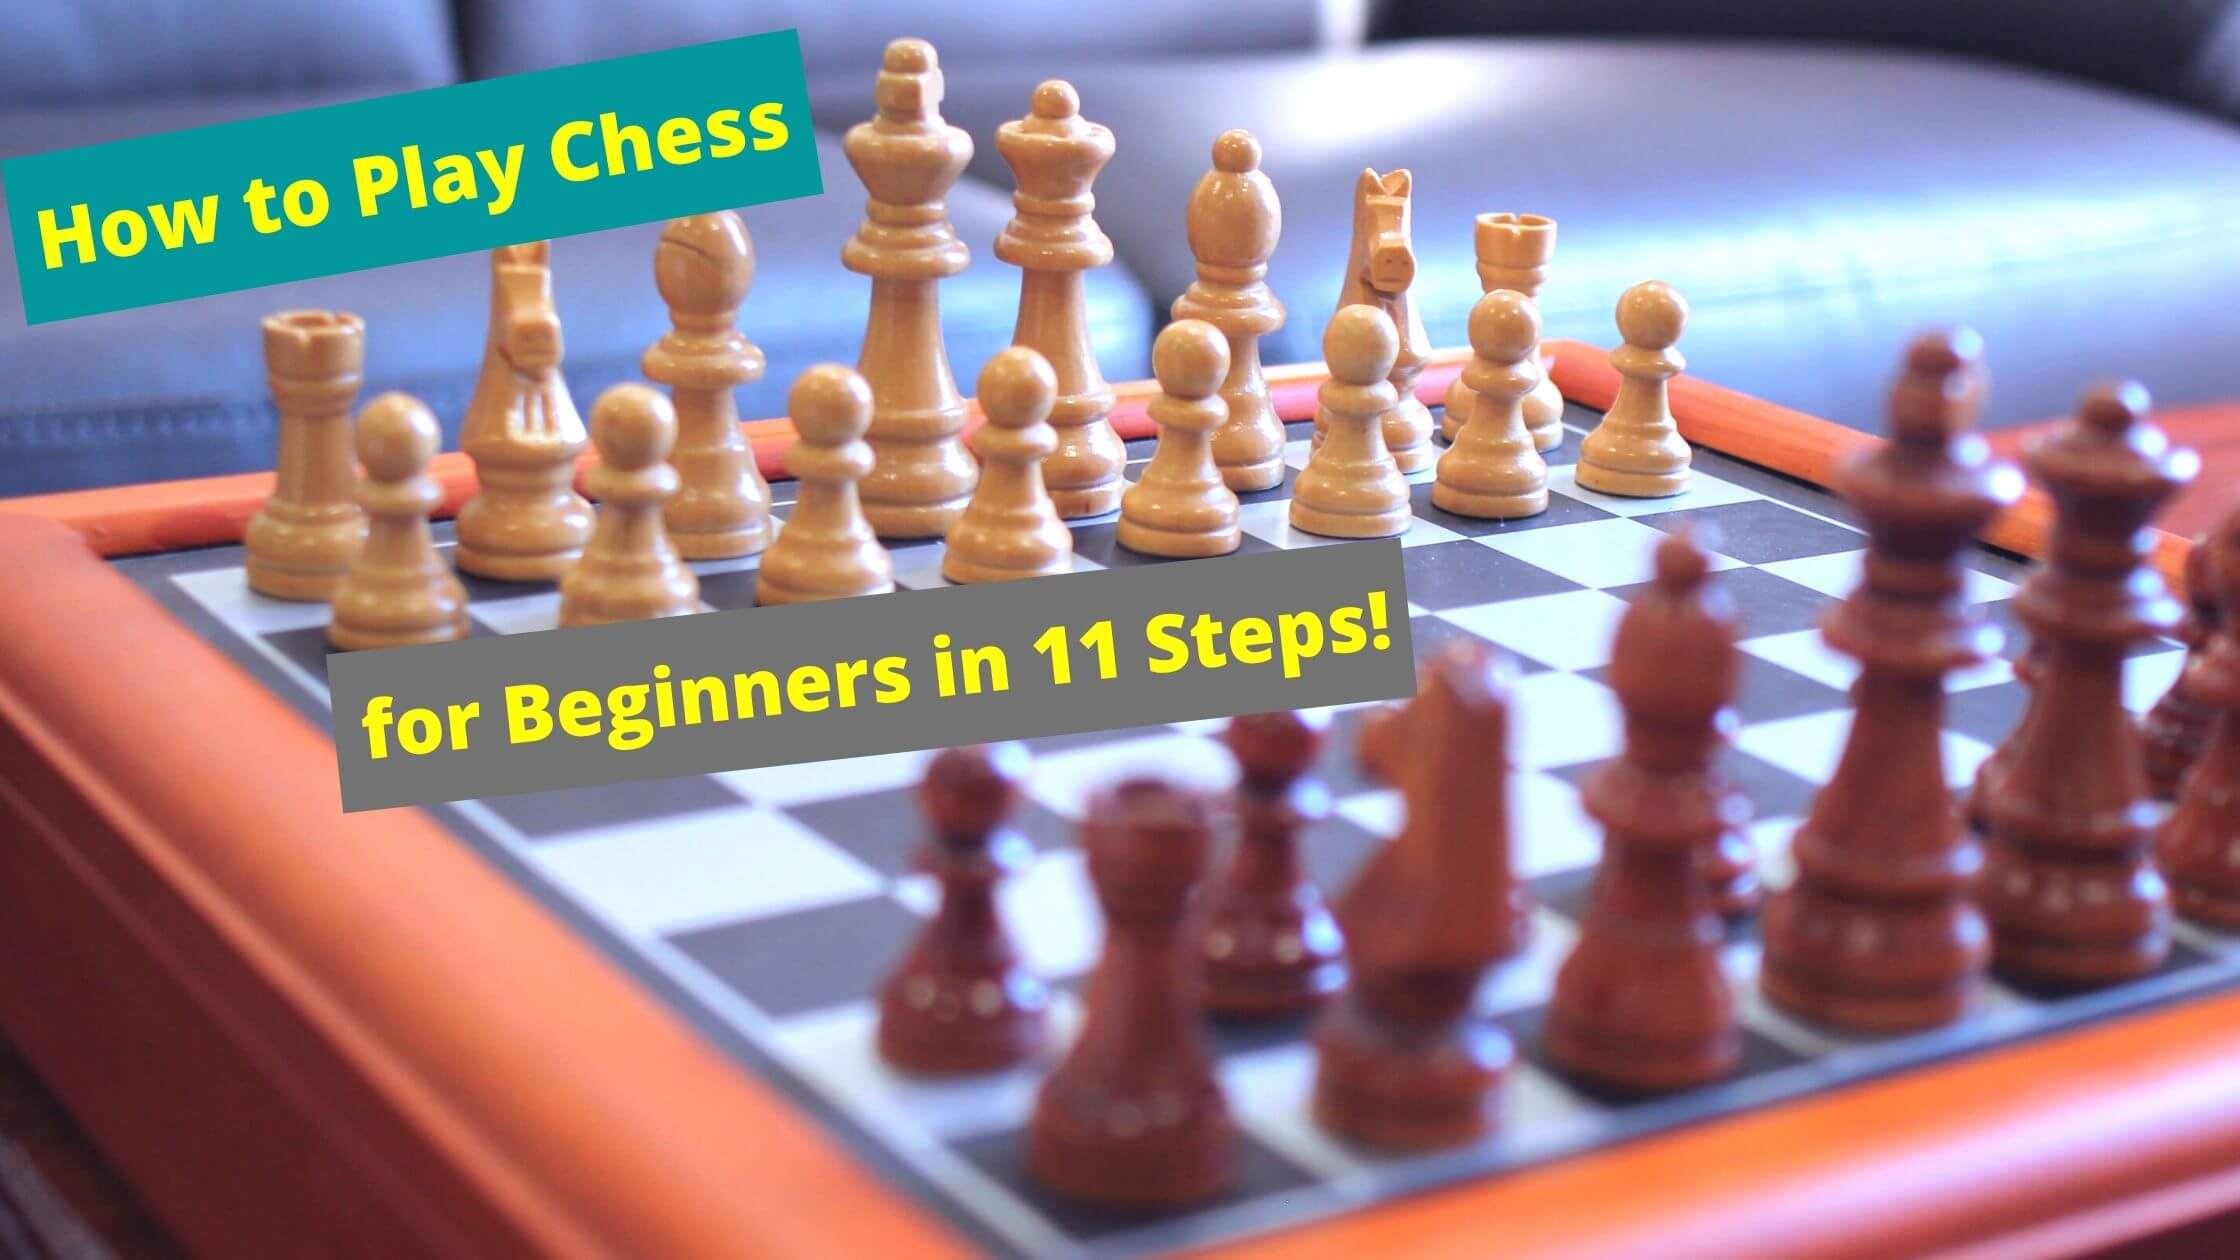 How To Play Chess For Beginners In 11 Steps By Utpal Sasane